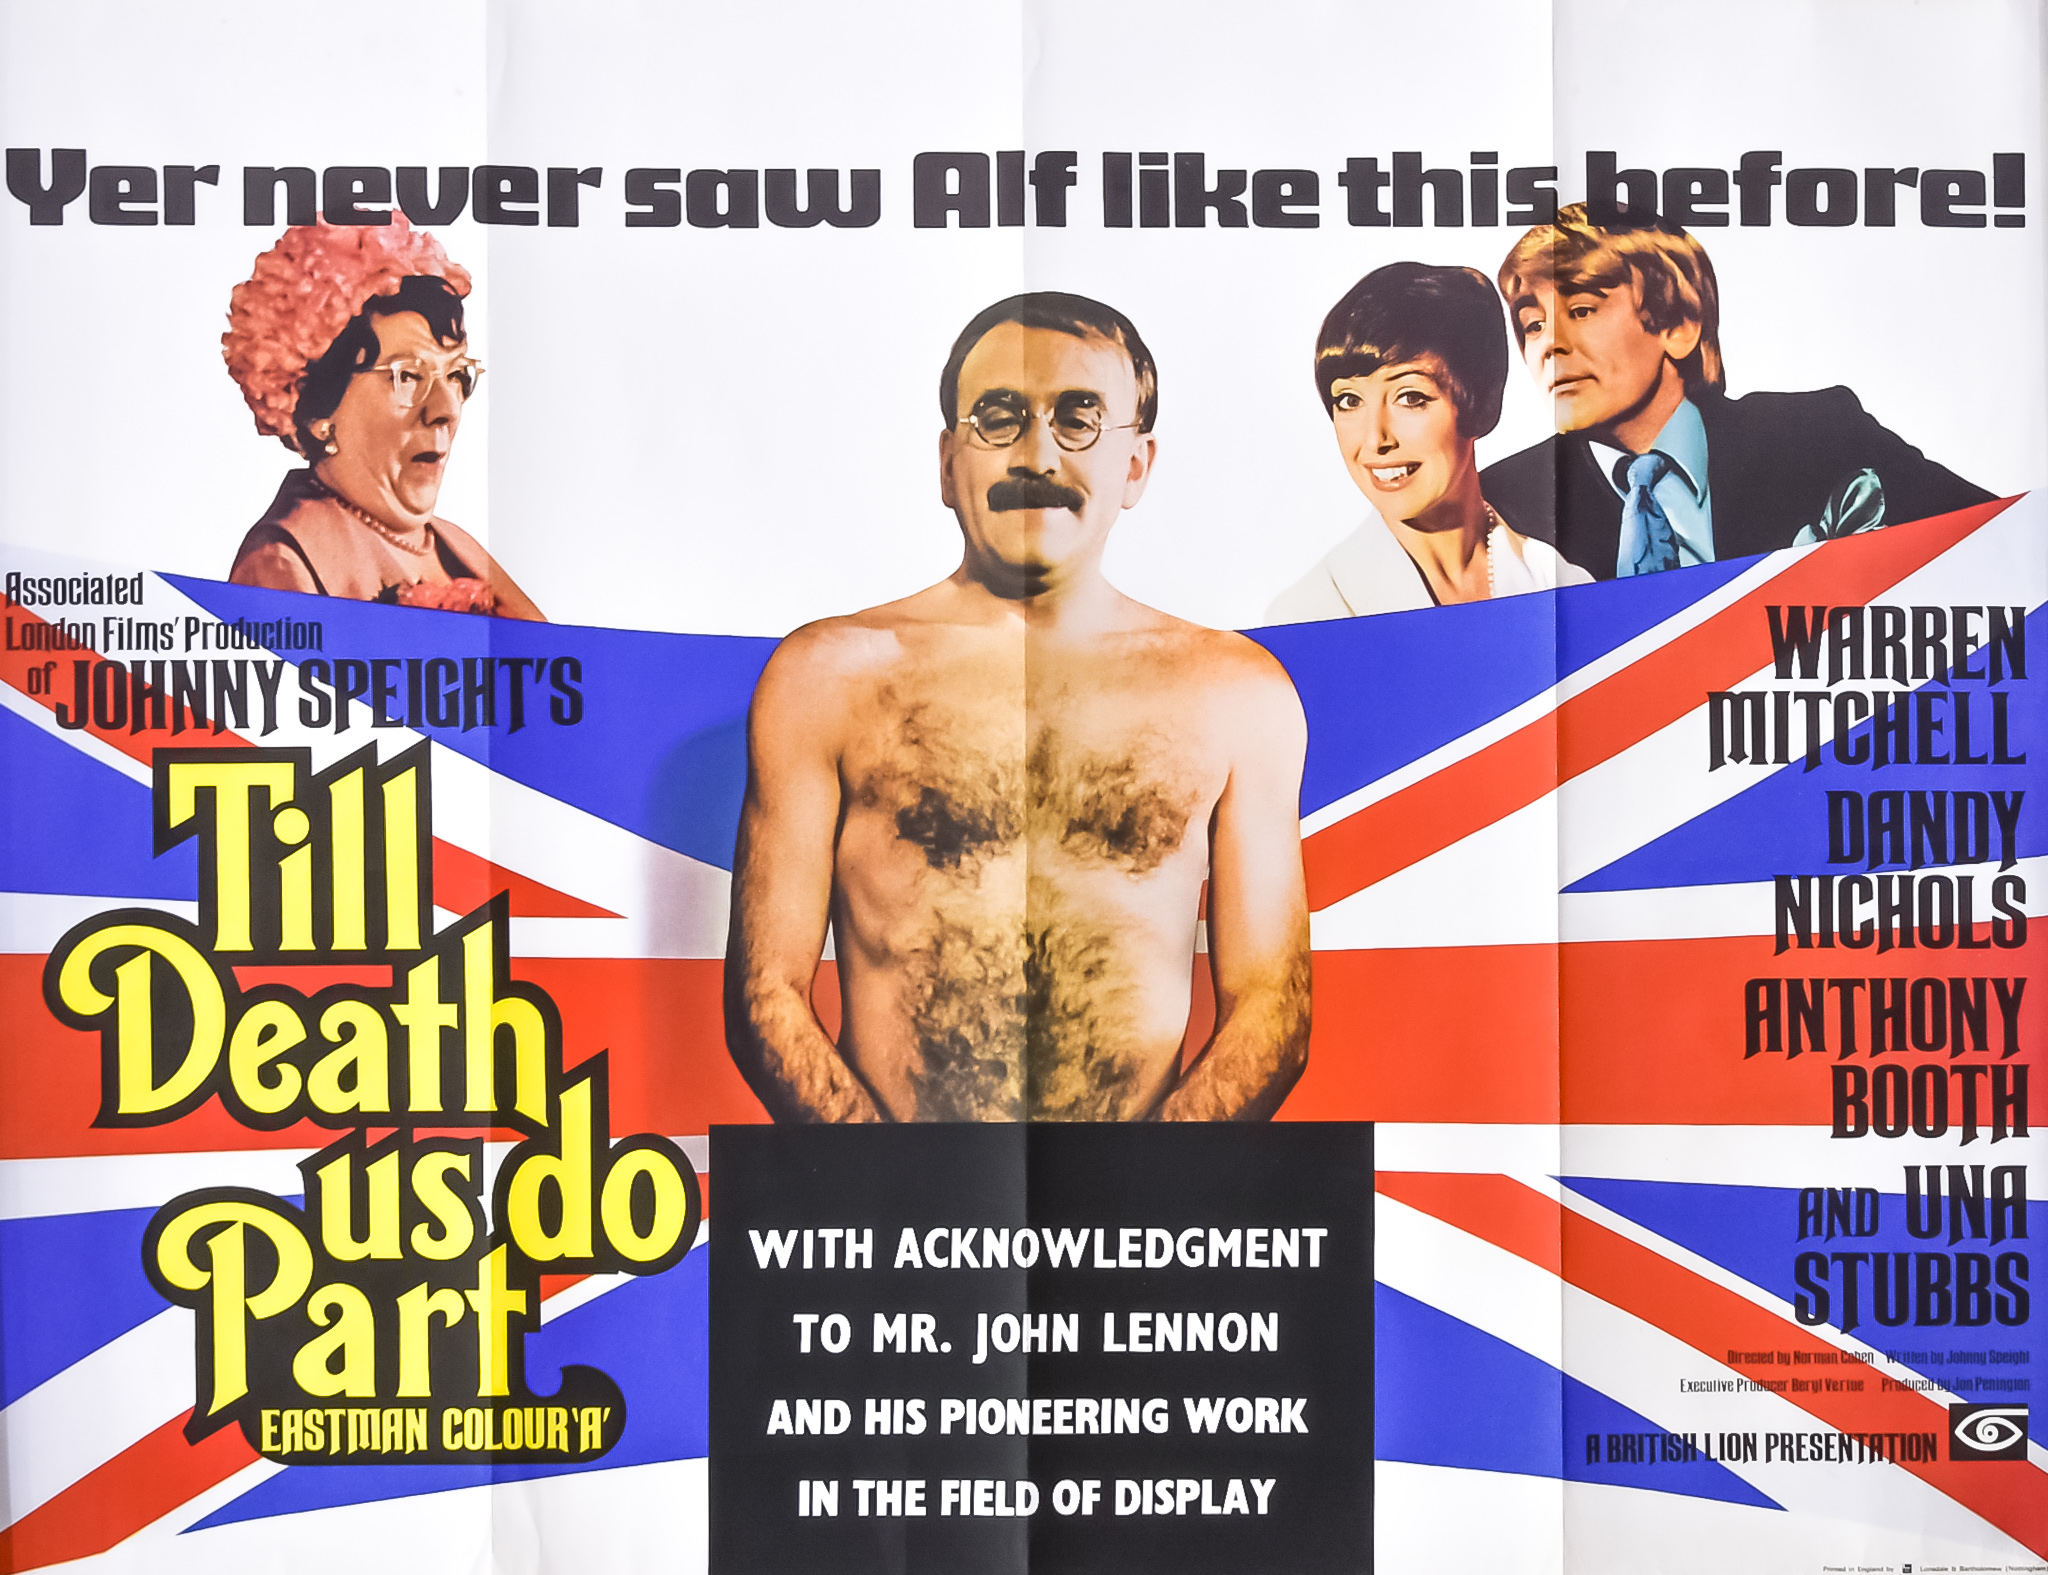 An Associated London Films Production Film Poster, 1972, "Till Death Us Do Part", printed by